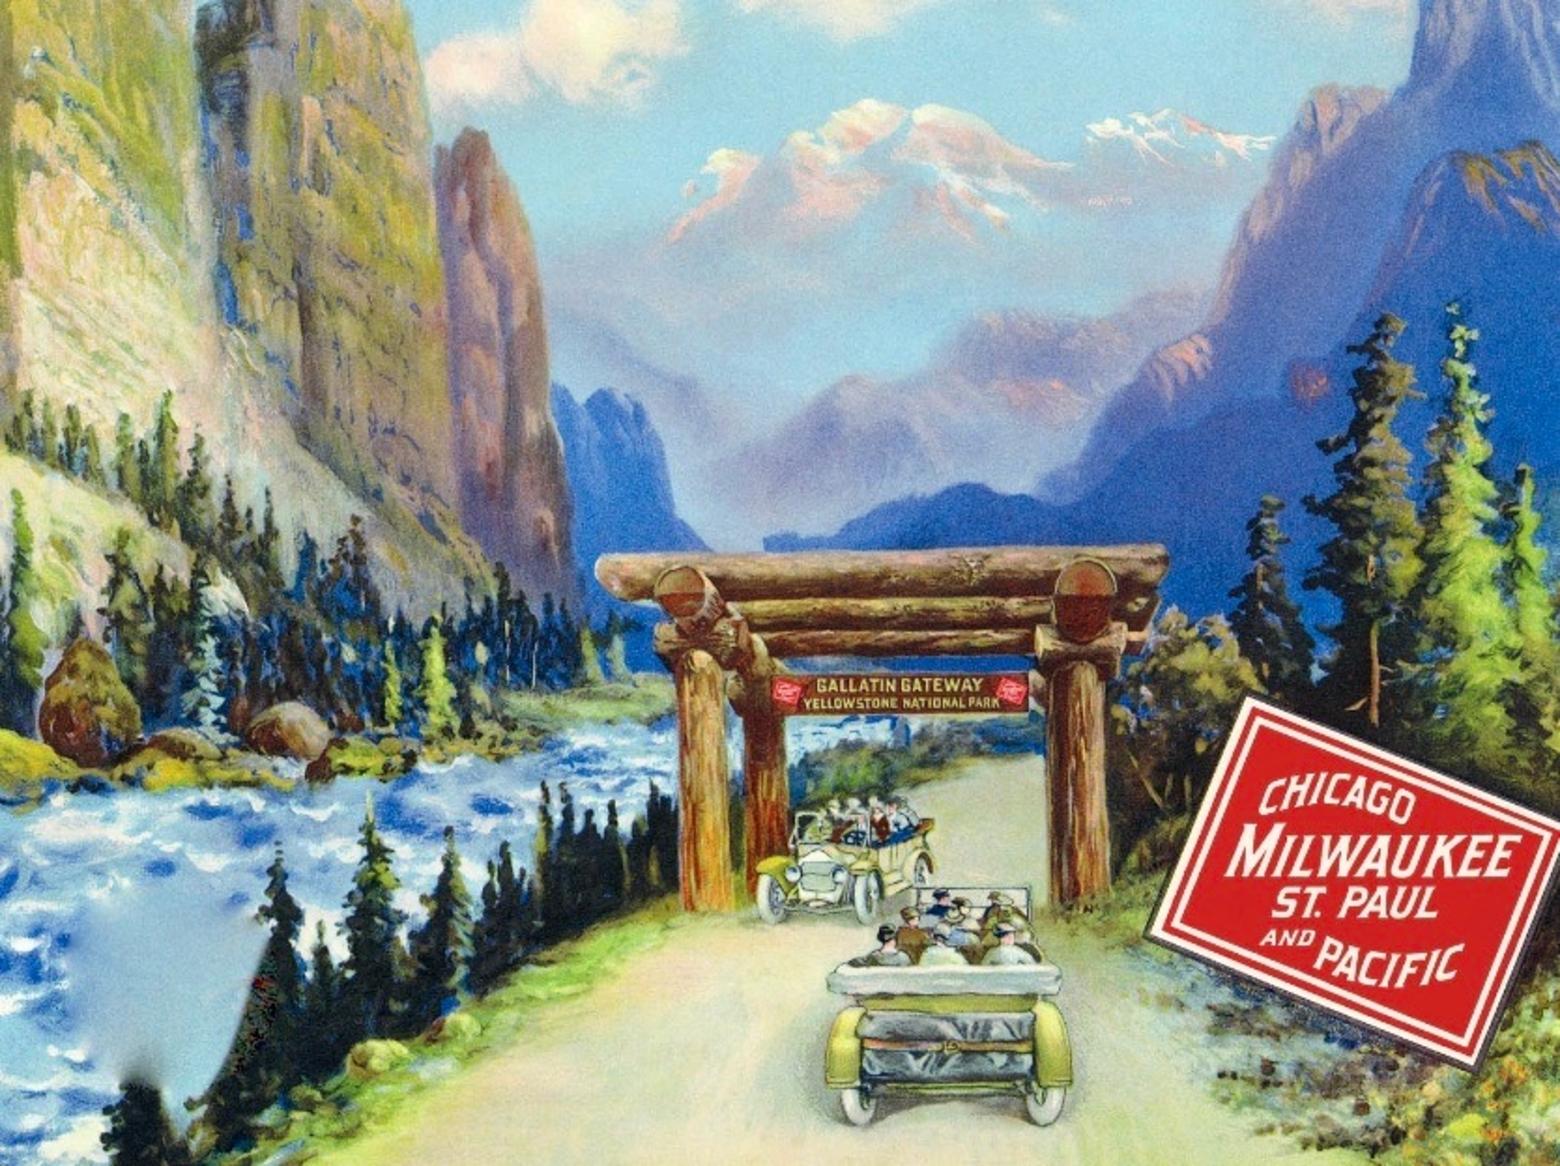 A 1930s-era postcard showing the stretch from Gallatin Gateway into the Gallatin Canyon representing a breathtaking portal to reach the west entrance of Yellowstone National Park. Today, with the presence of Big Sky which wasn't there in the 1930s, the drive represents one of the most dangerous stretches of highway in Montana and traffic is getting worse as Big Sky developers locate affordable housing in the Gallatin Valley, requiring them to make a 30-mile commute.